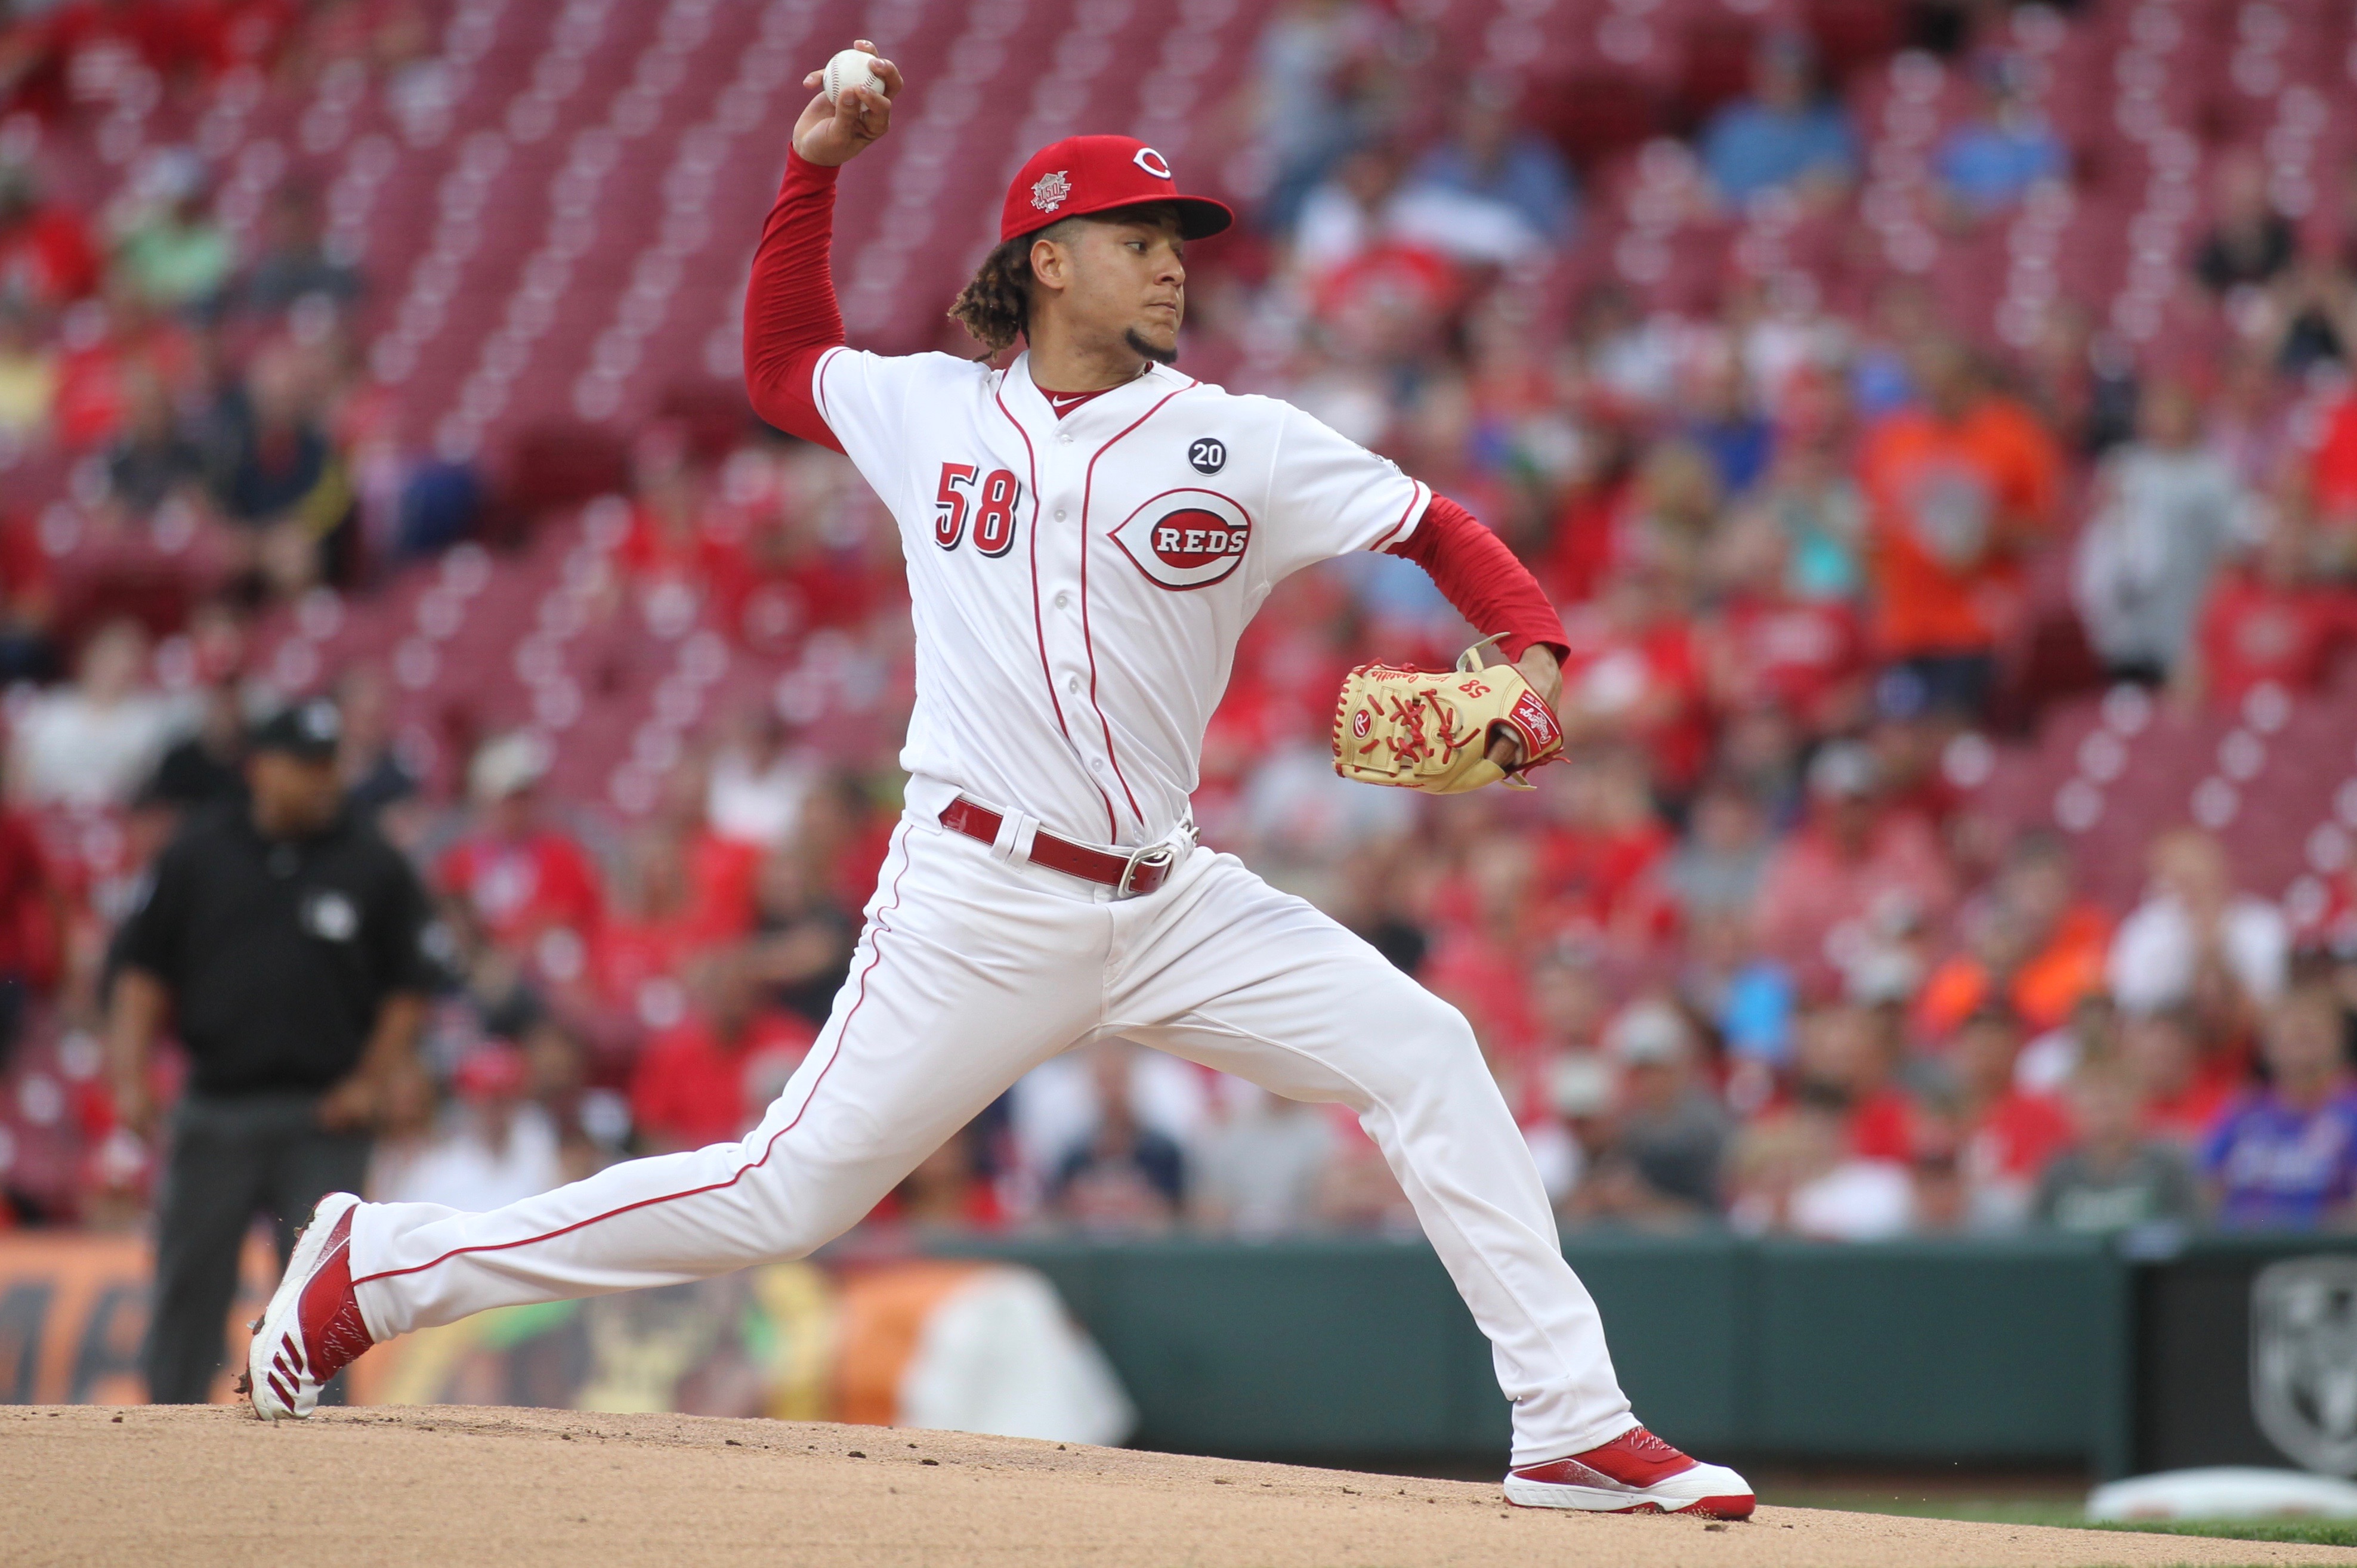 Ask Hal: If the Reds trade India, what would they get in return?